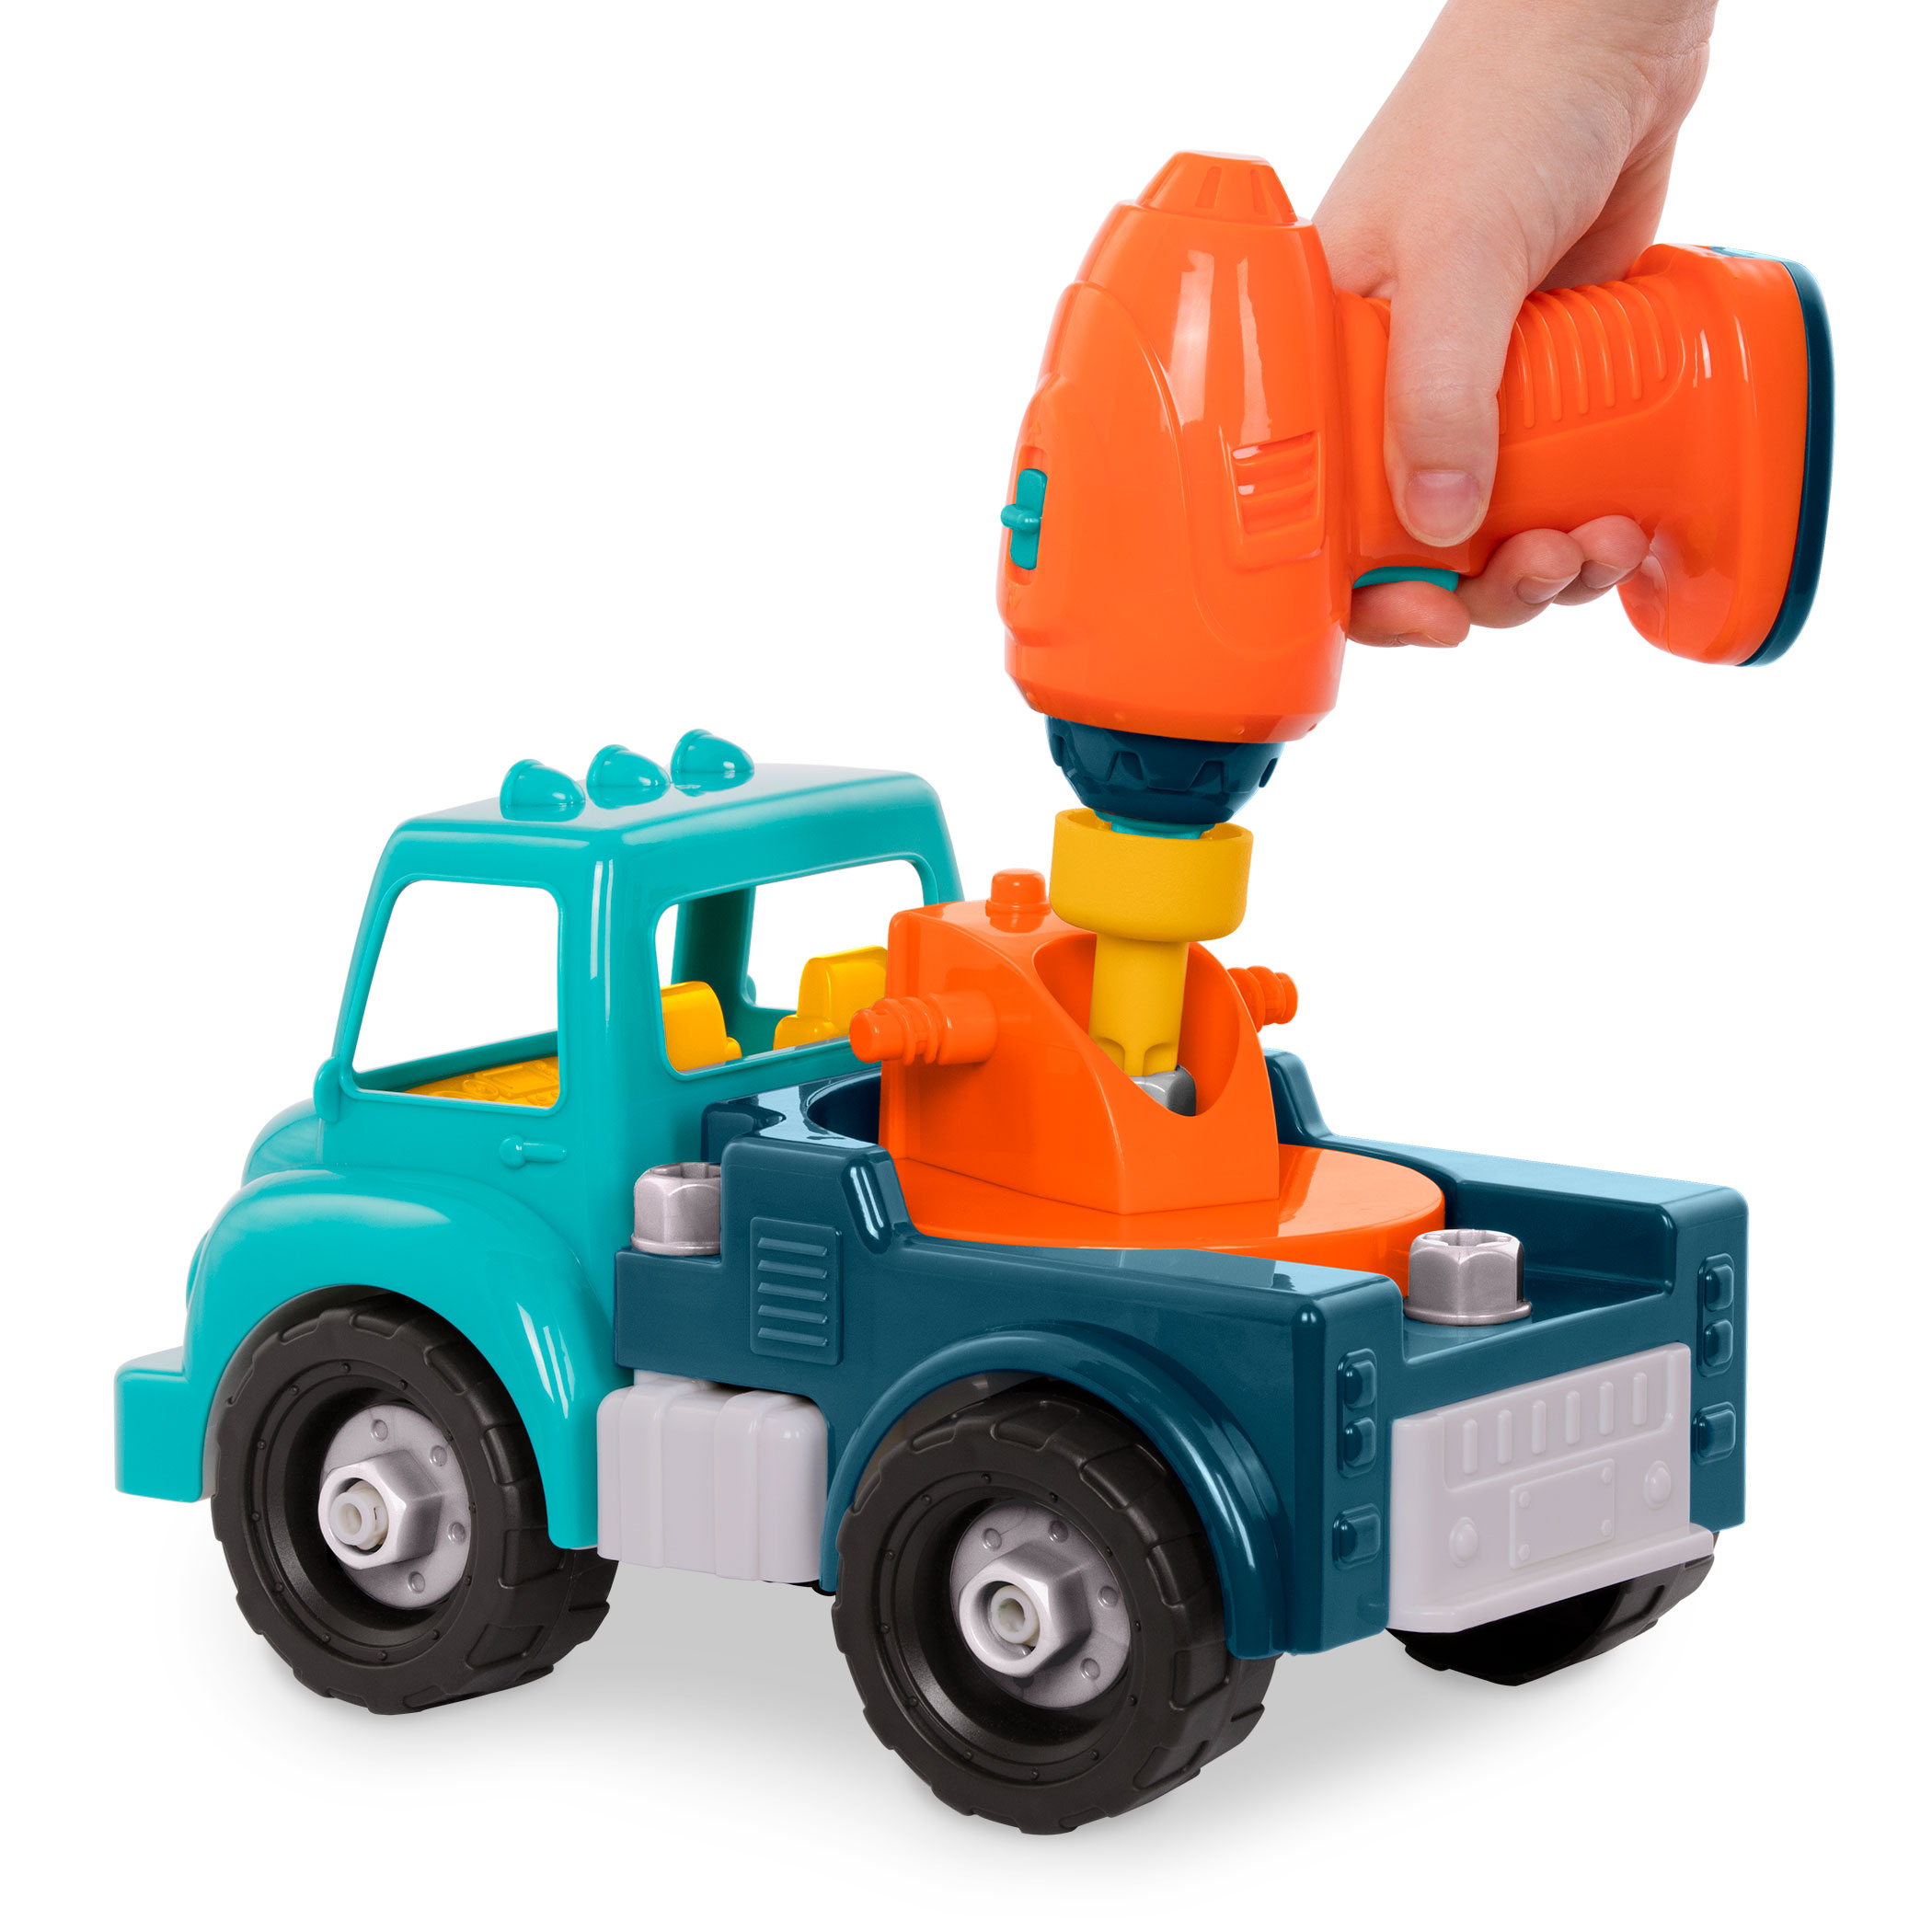 Take-Apart Crane, Construction Toys for Toddlers